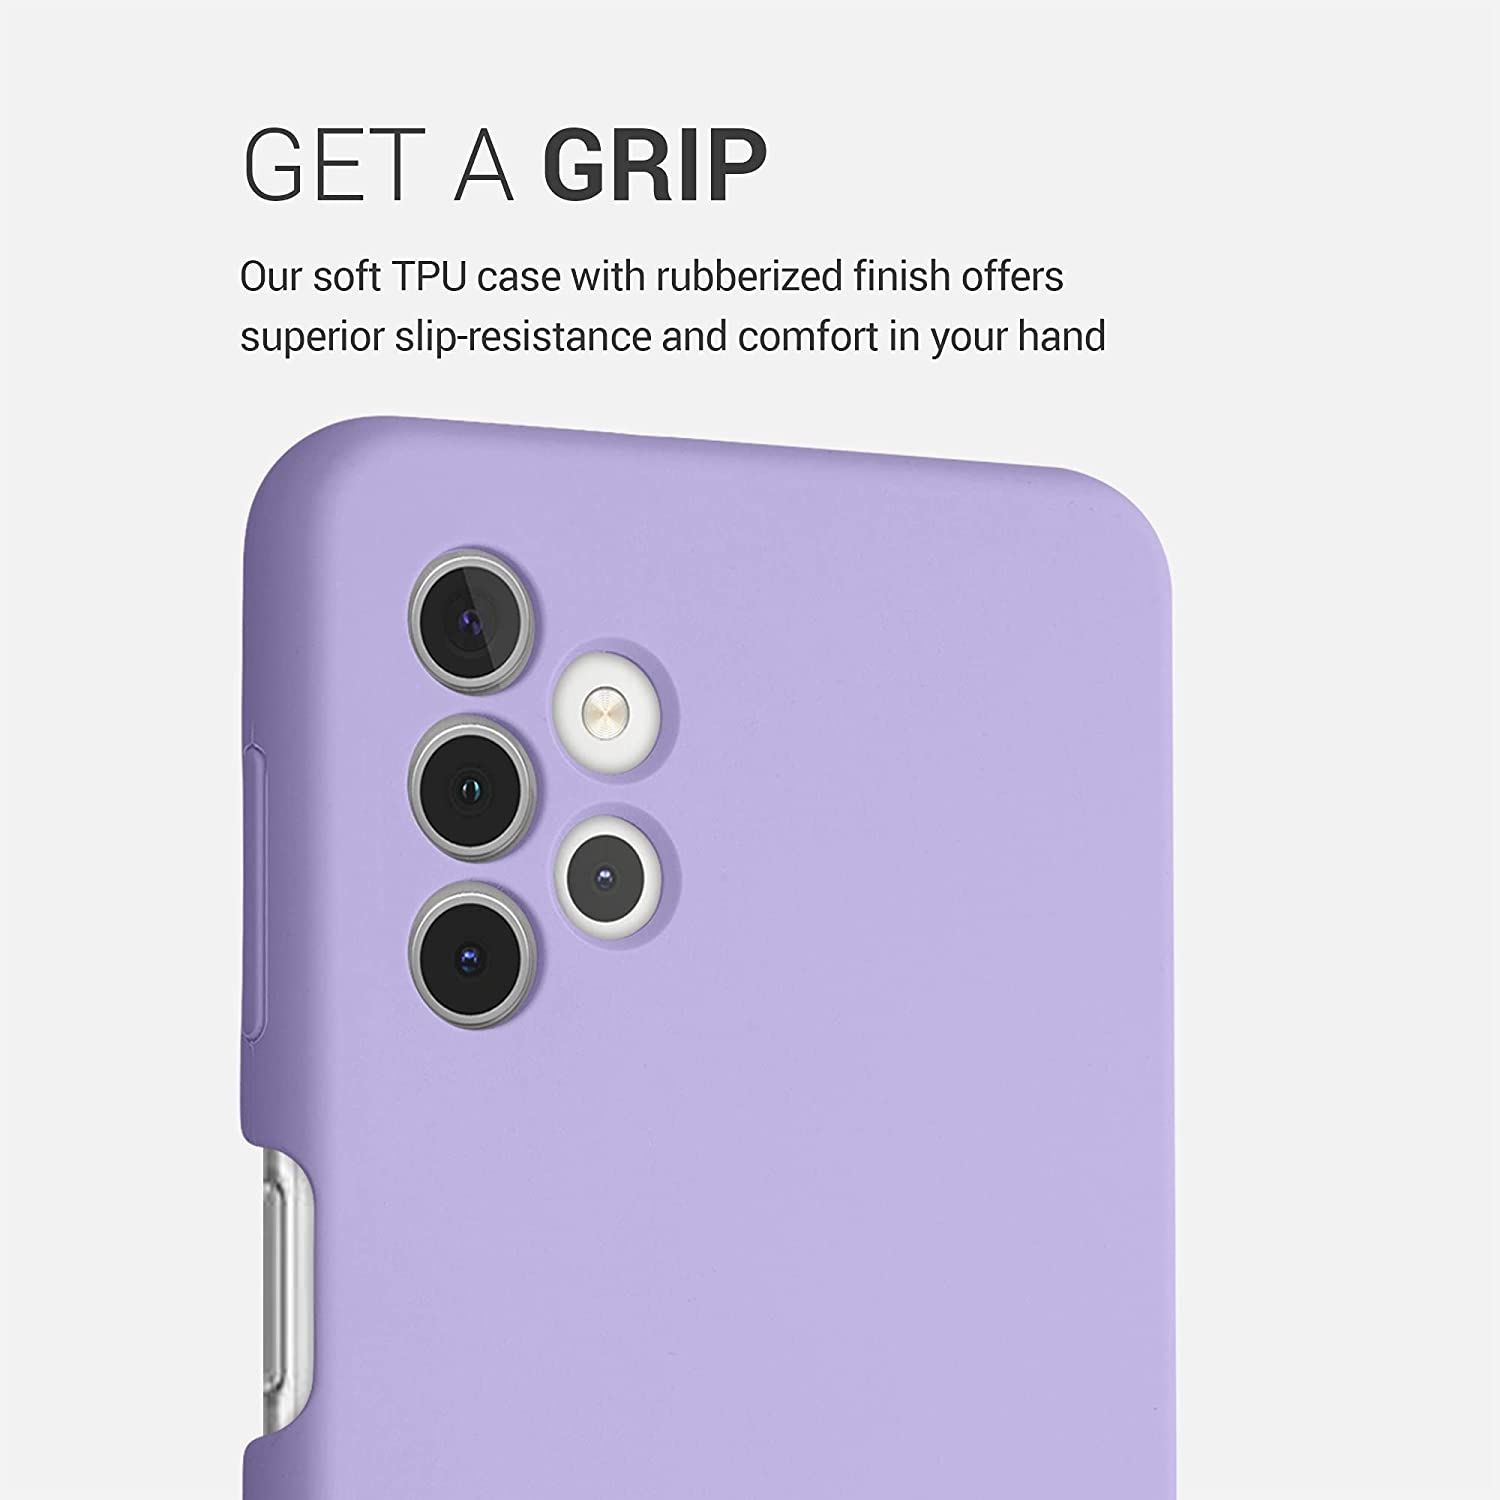 kw-mobile-thiki-silikonis-samsung-galaxy-a32-5g-soft-flexible-rubber-cover-violet-purple-2.jpg